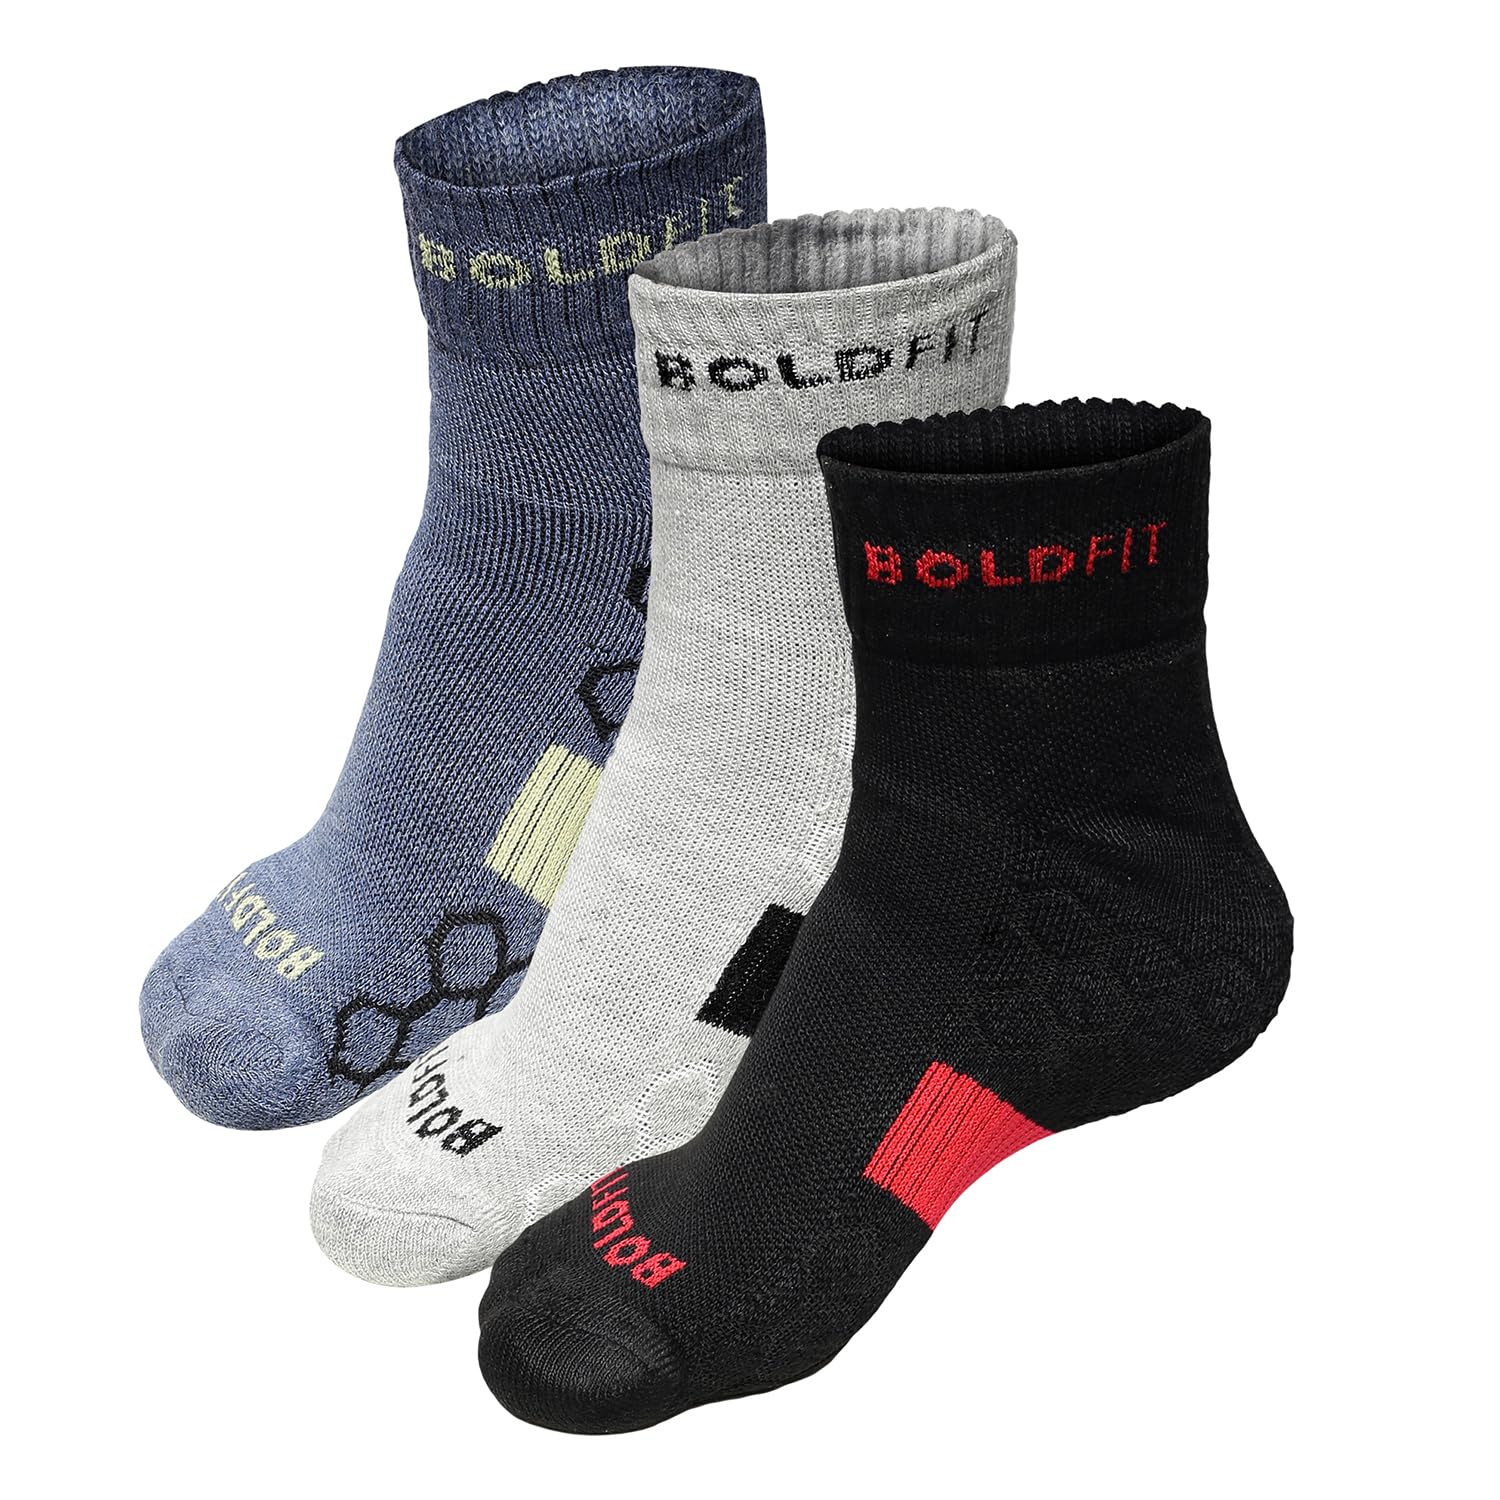 Unisex Socks for Sports, Formal, Casual Wear ( 3 Pair )